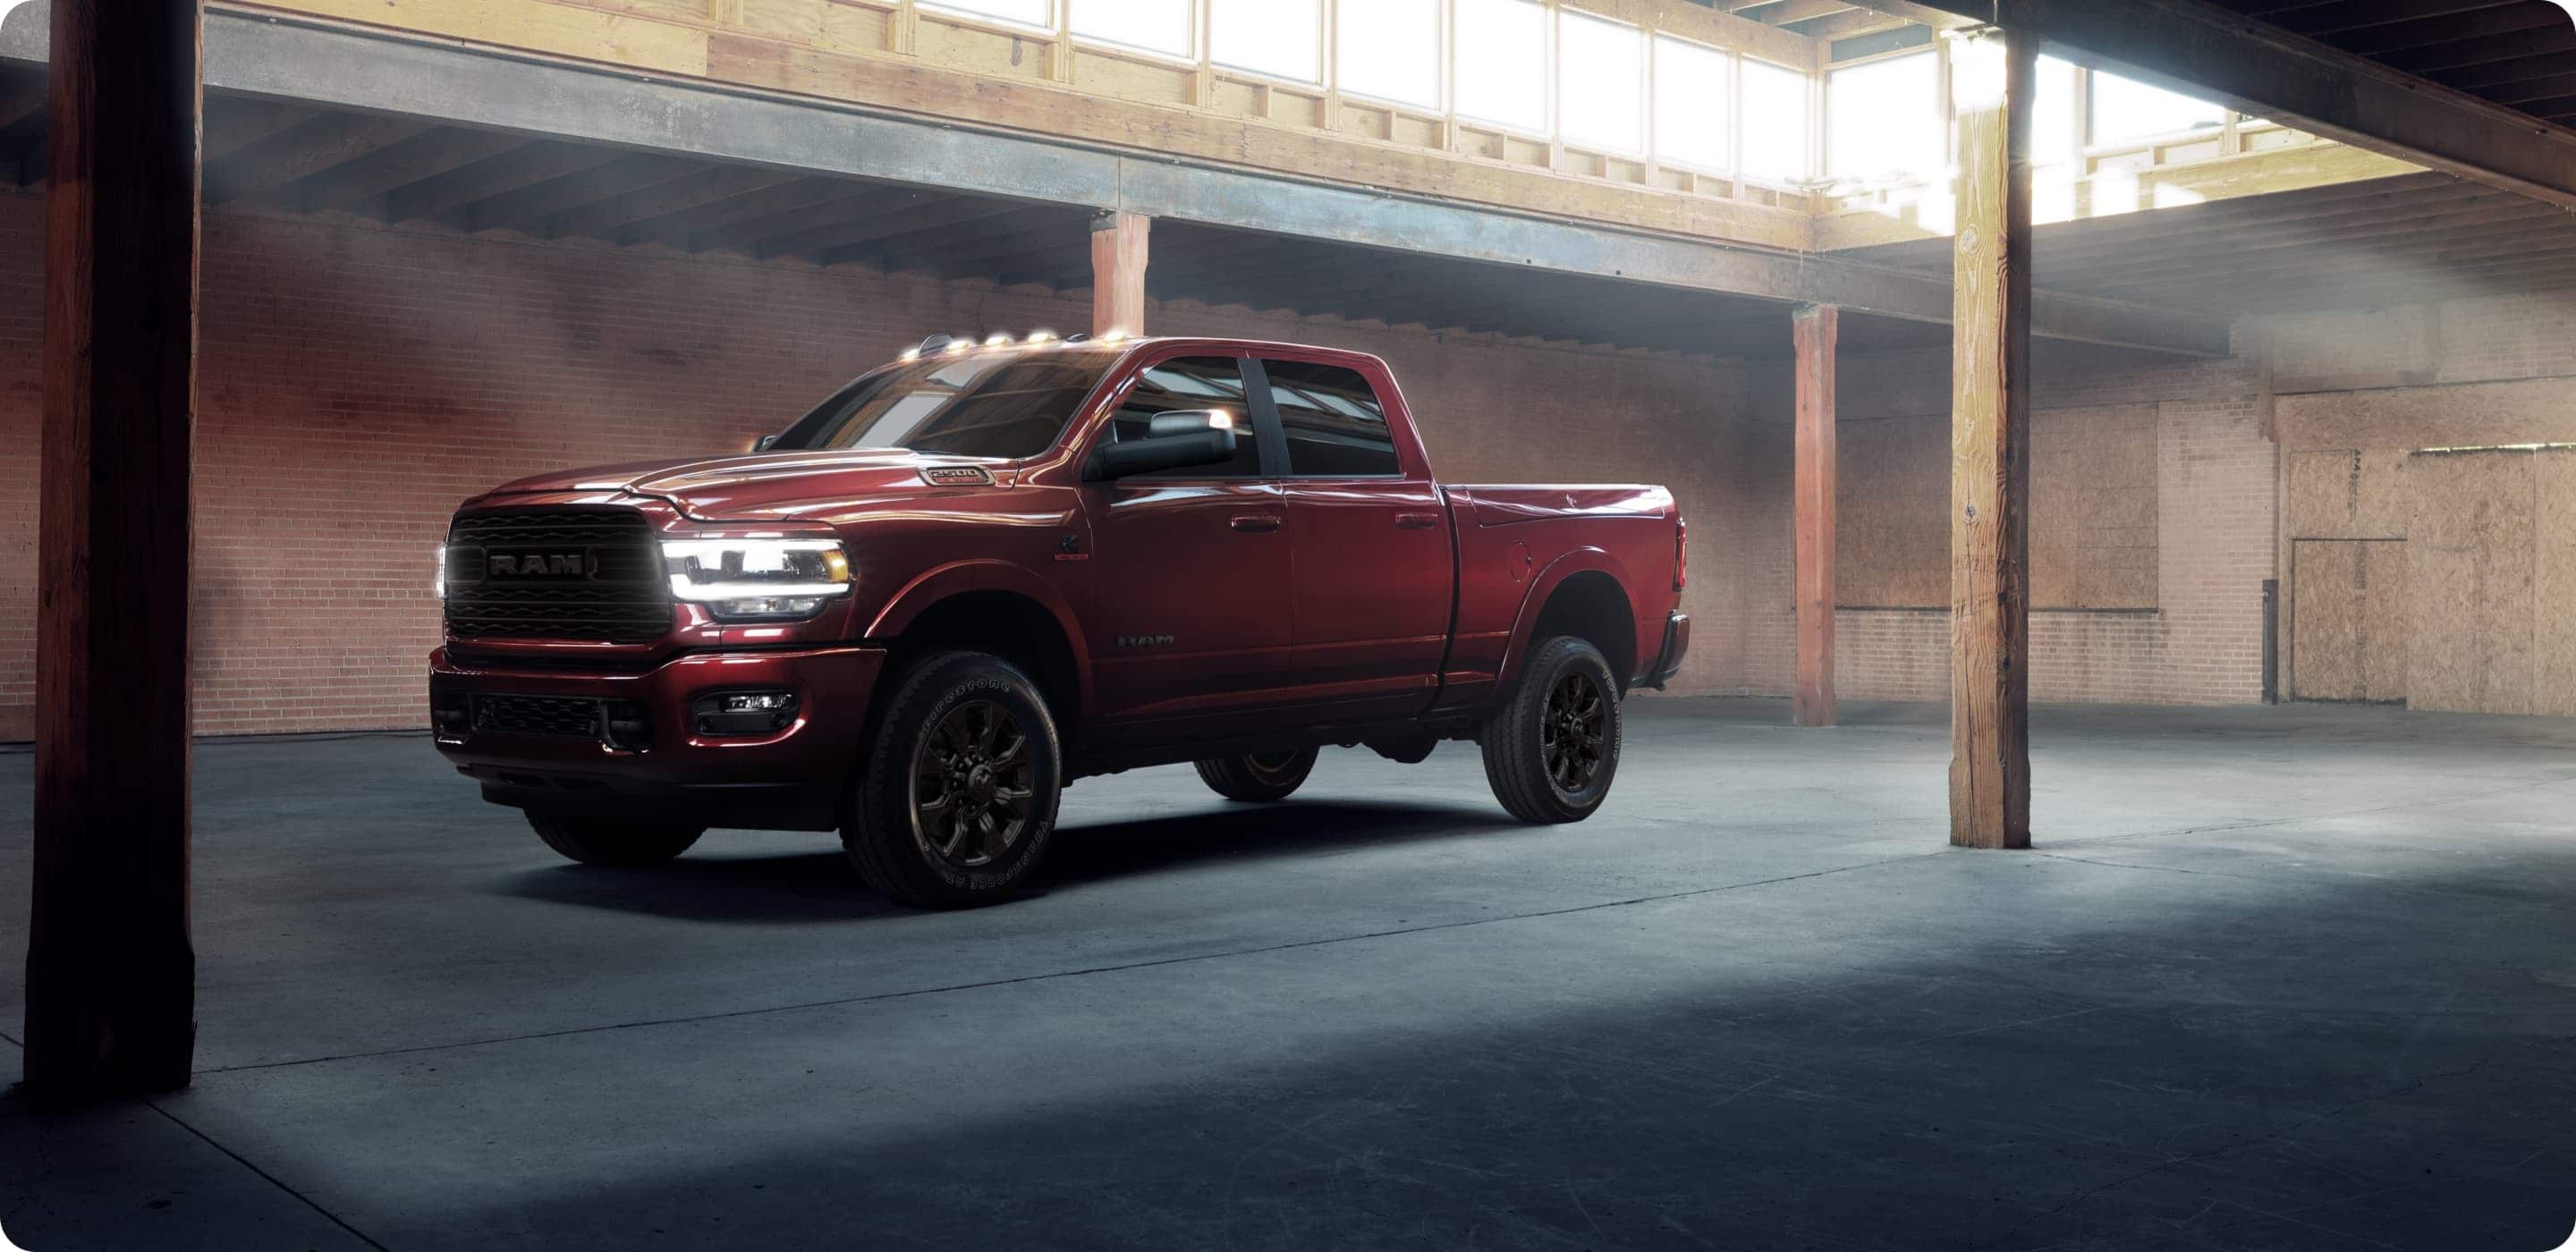 Display A red 2021 Ram 2500 Limited Night Edition parked in a parking structure with its lights on.